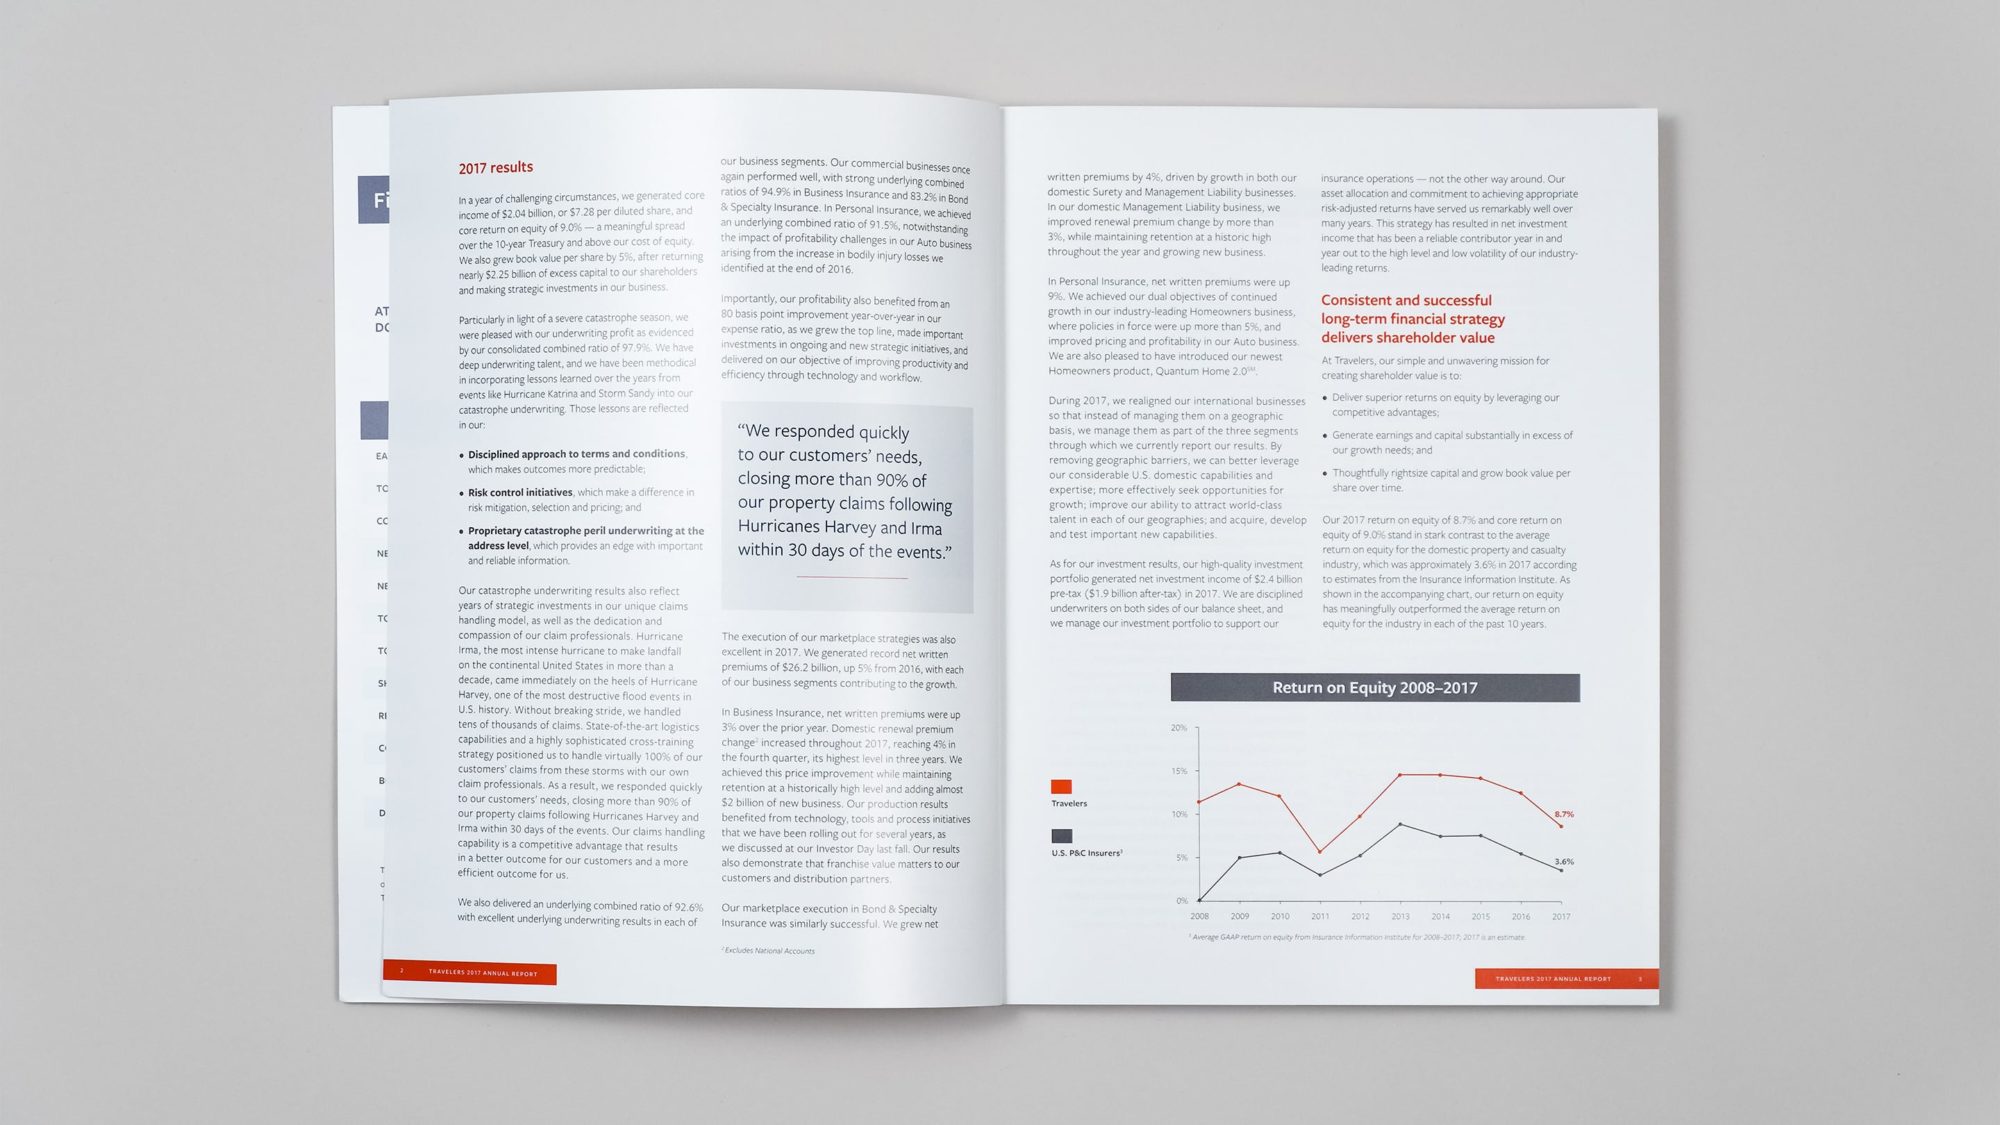 Interior spread of annual report with CEO's letter. Copy is supplemented with a line graph showing Return on Equity since 2008 and a pullquote from the CEO.